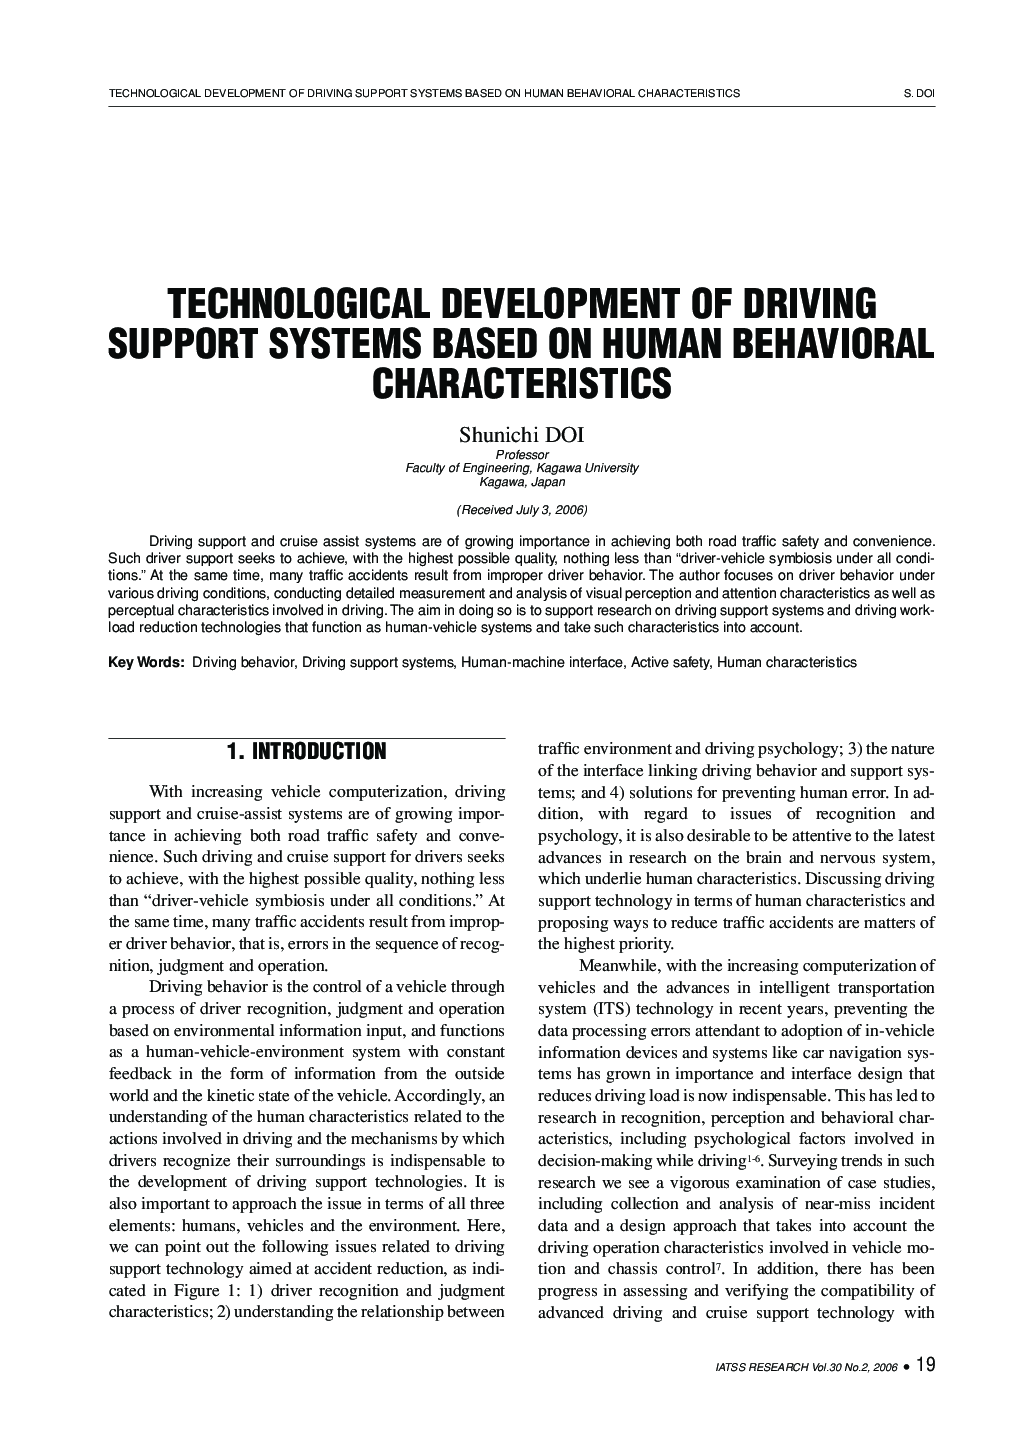 TECHNOLOGICAL DEVELOPMENT OF DRIVING SUPPORT SYSTEMS BASED ON HUMAN BEHAVIORAL CHARACTERISTICS